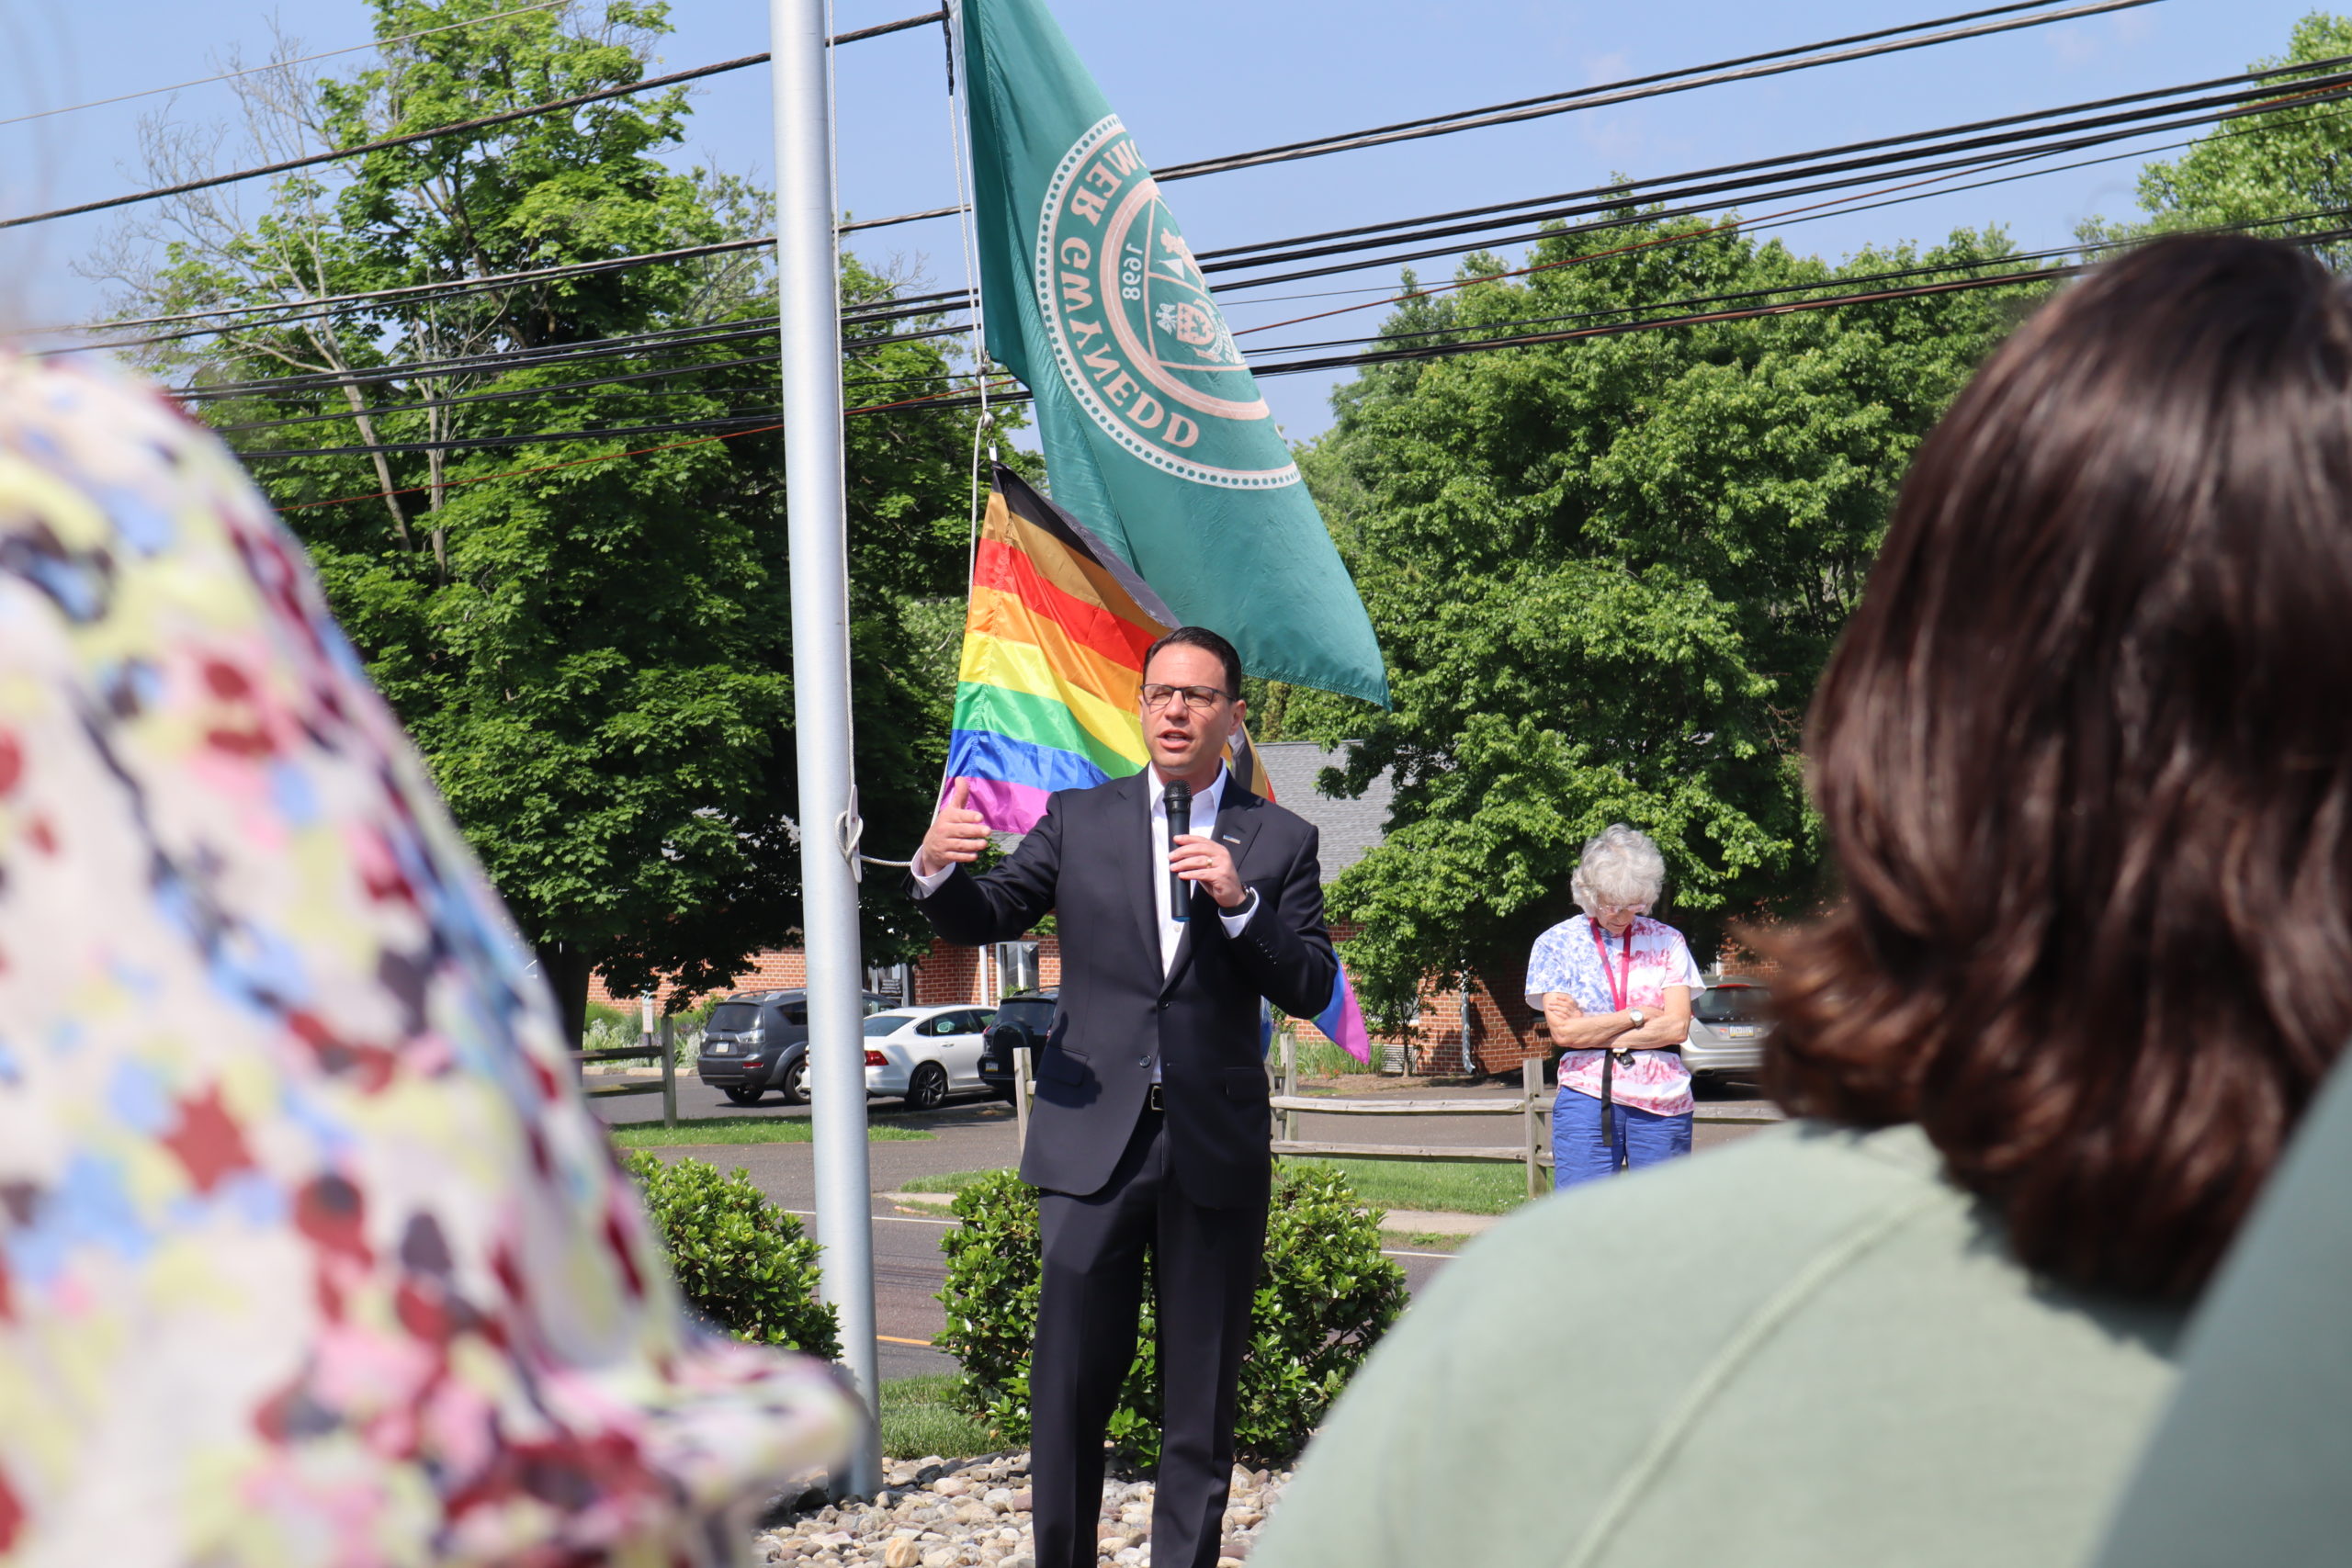 Josh speaking in front of a Pride flag